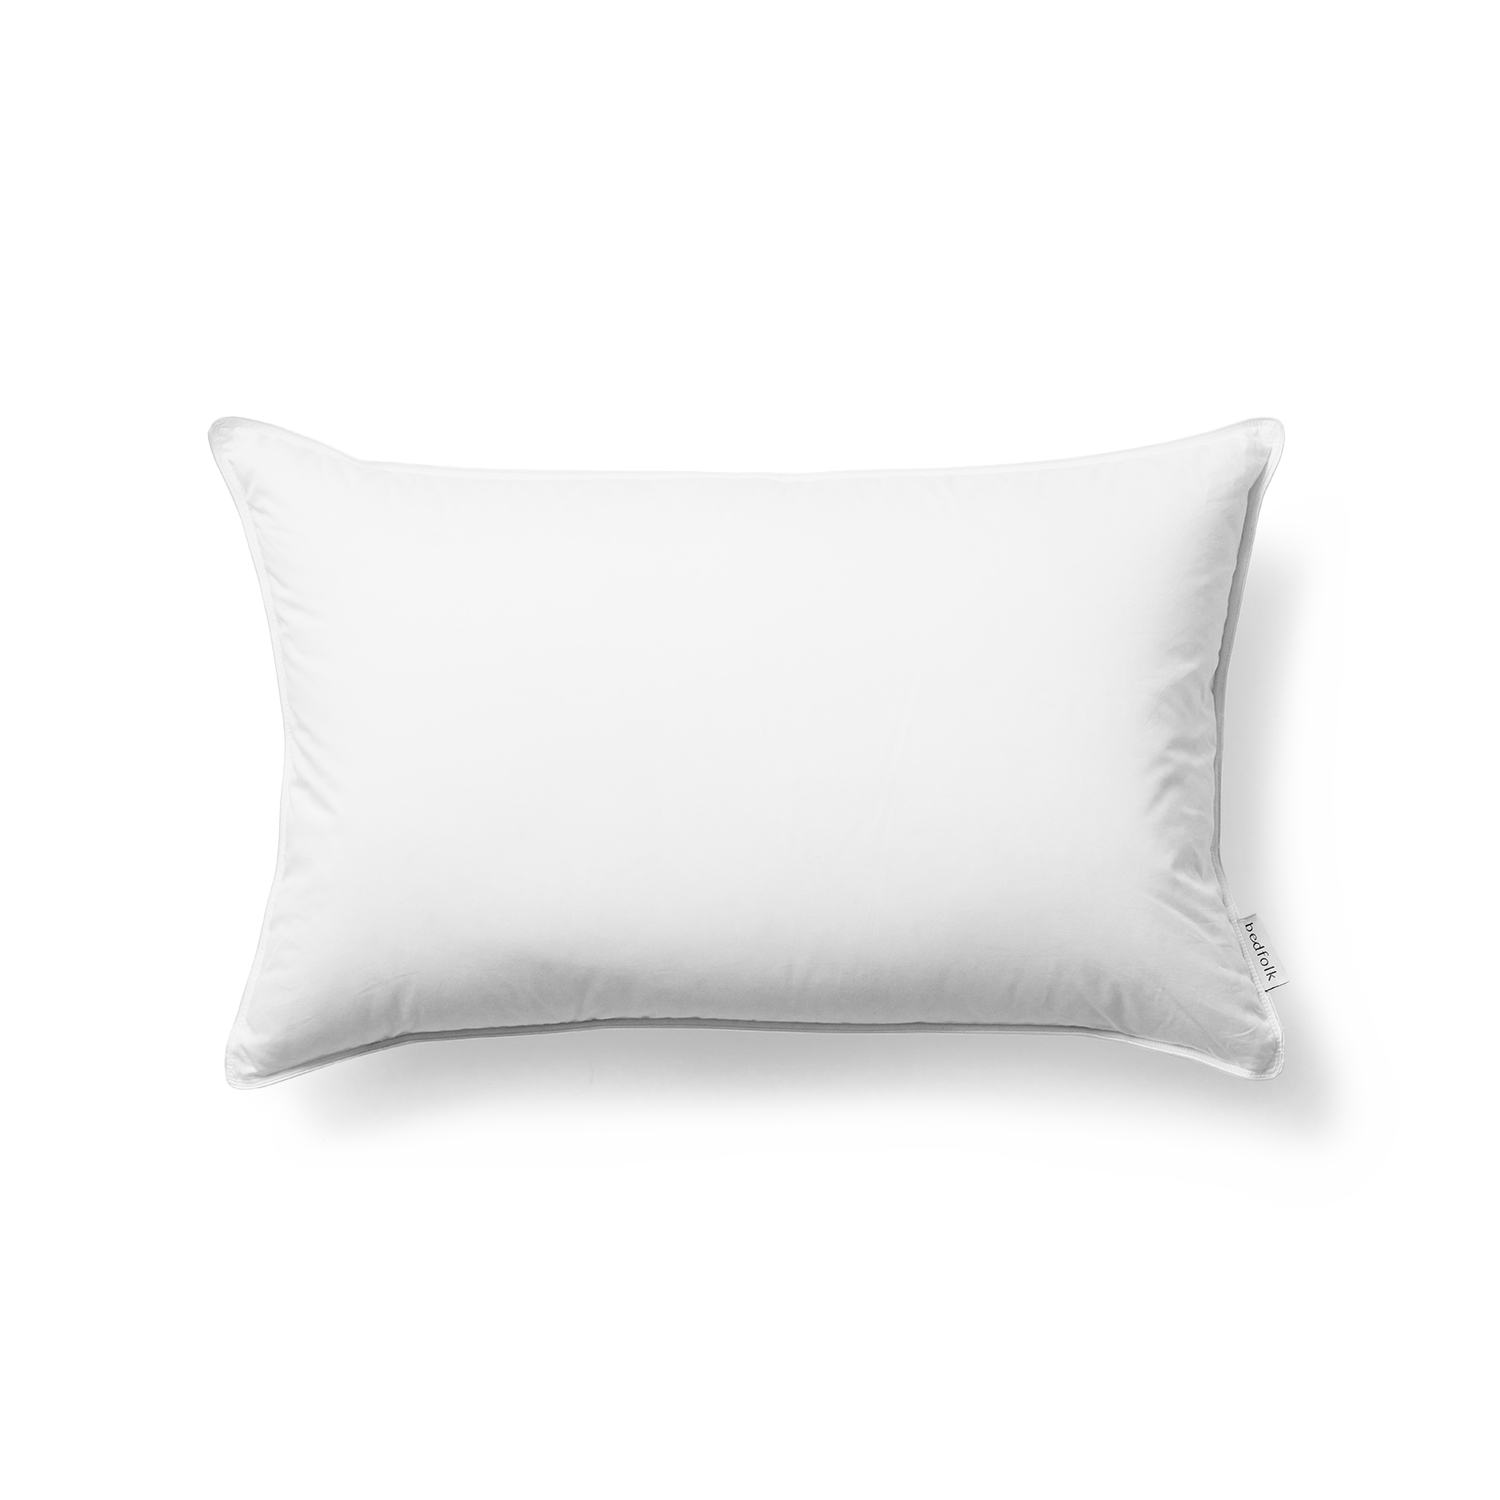 The Recycled Down Pillow